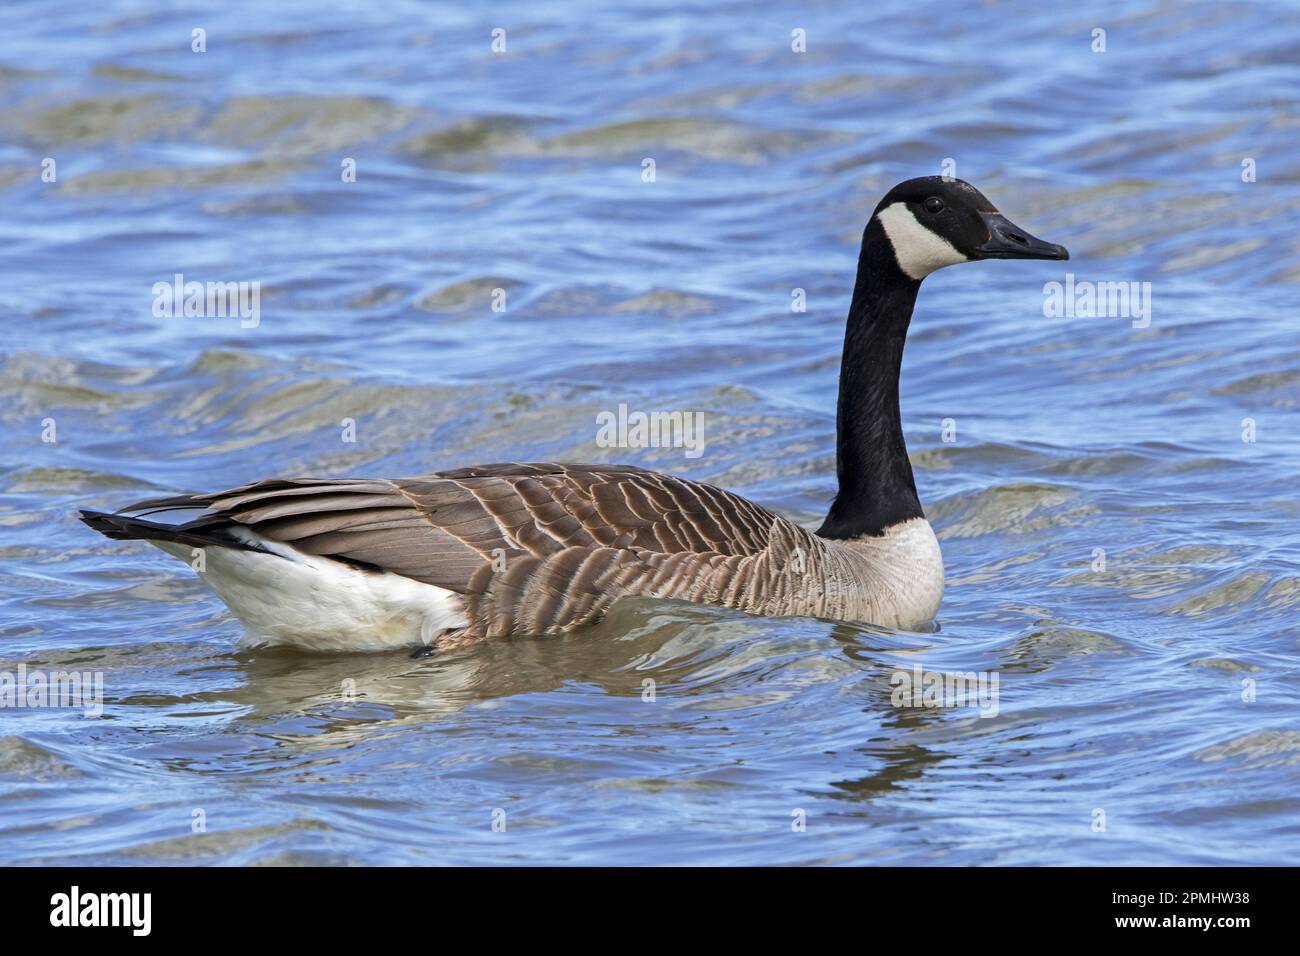 Canada goose / Canadian goose (Branta canadensis) swimming in water of pond in spring Stock Photo